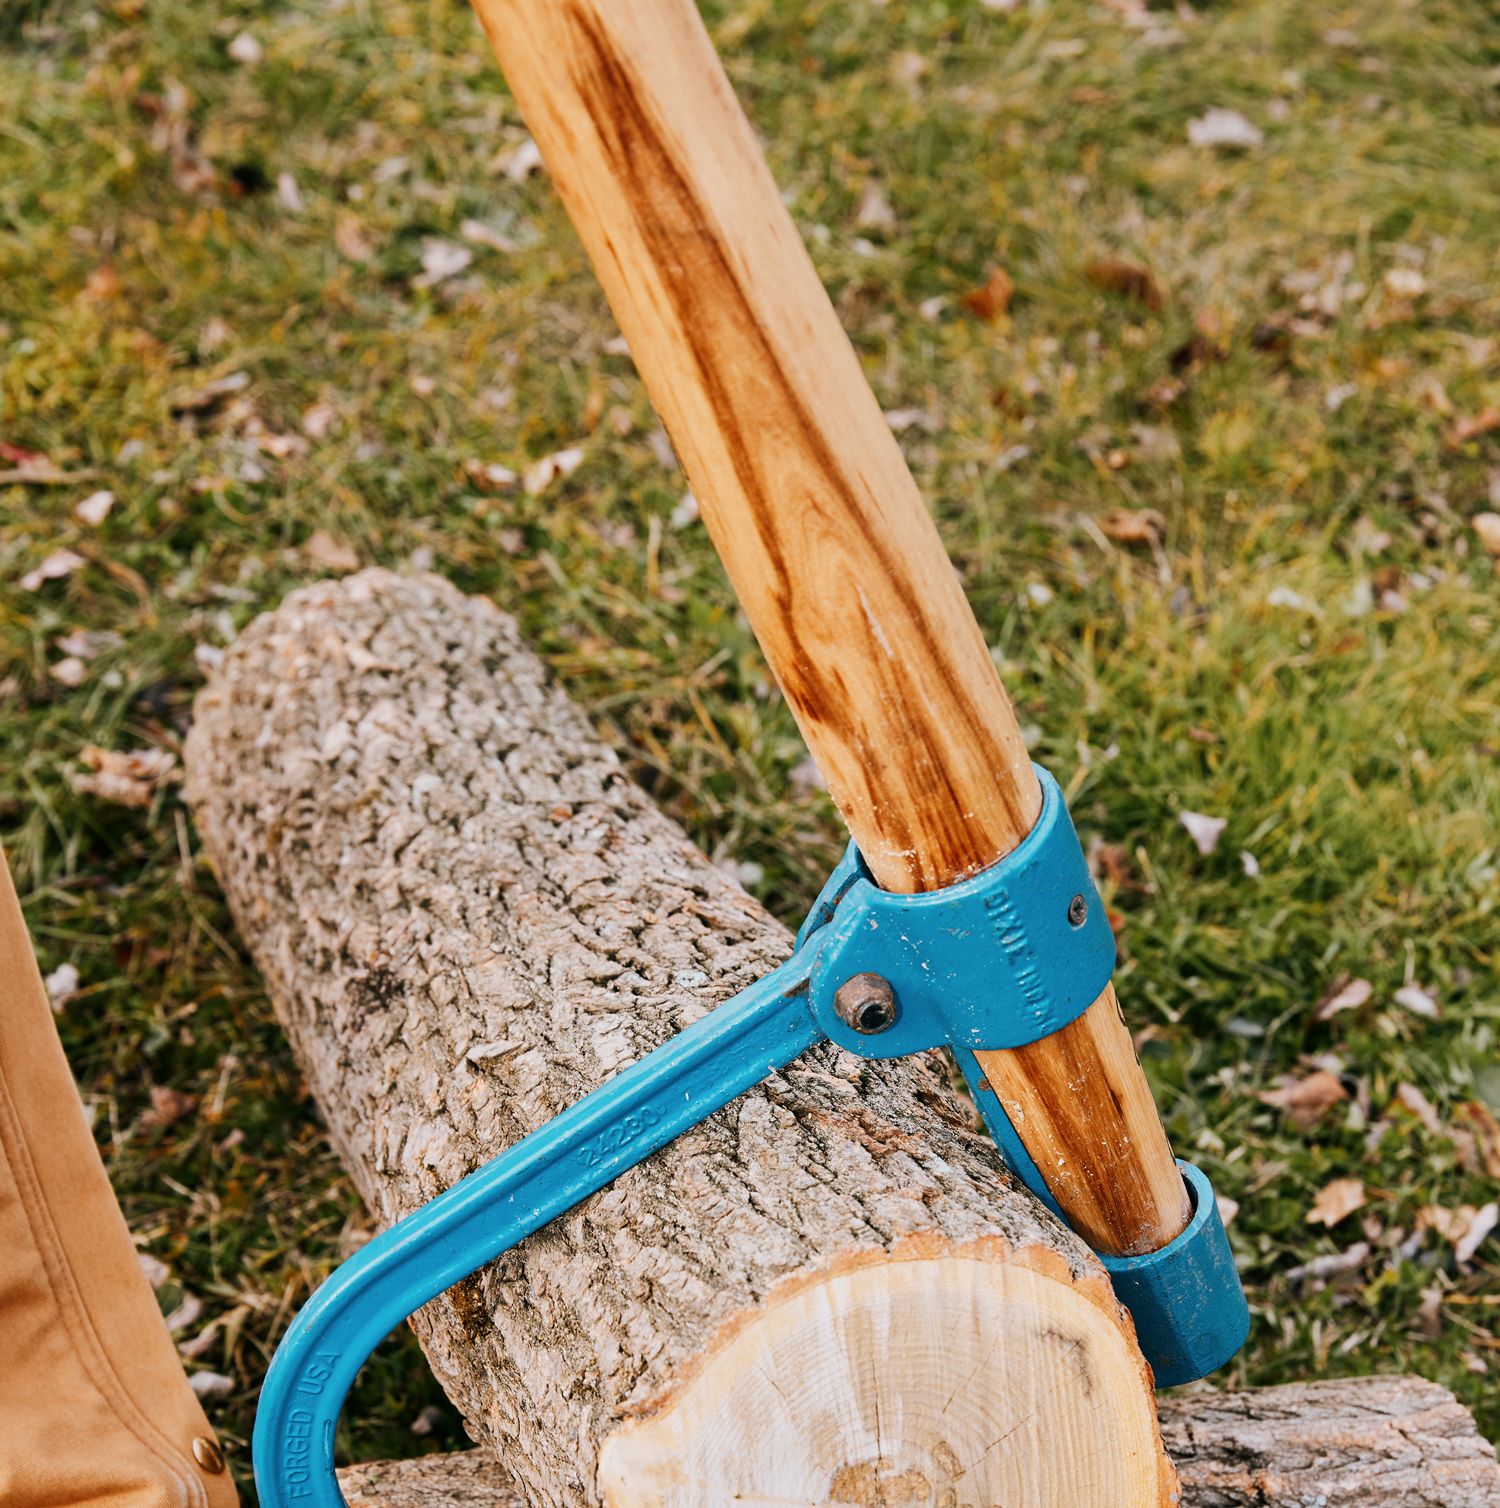 Cutting Firewood This Winter? Here Are the Chainsaw Accessories We Use.